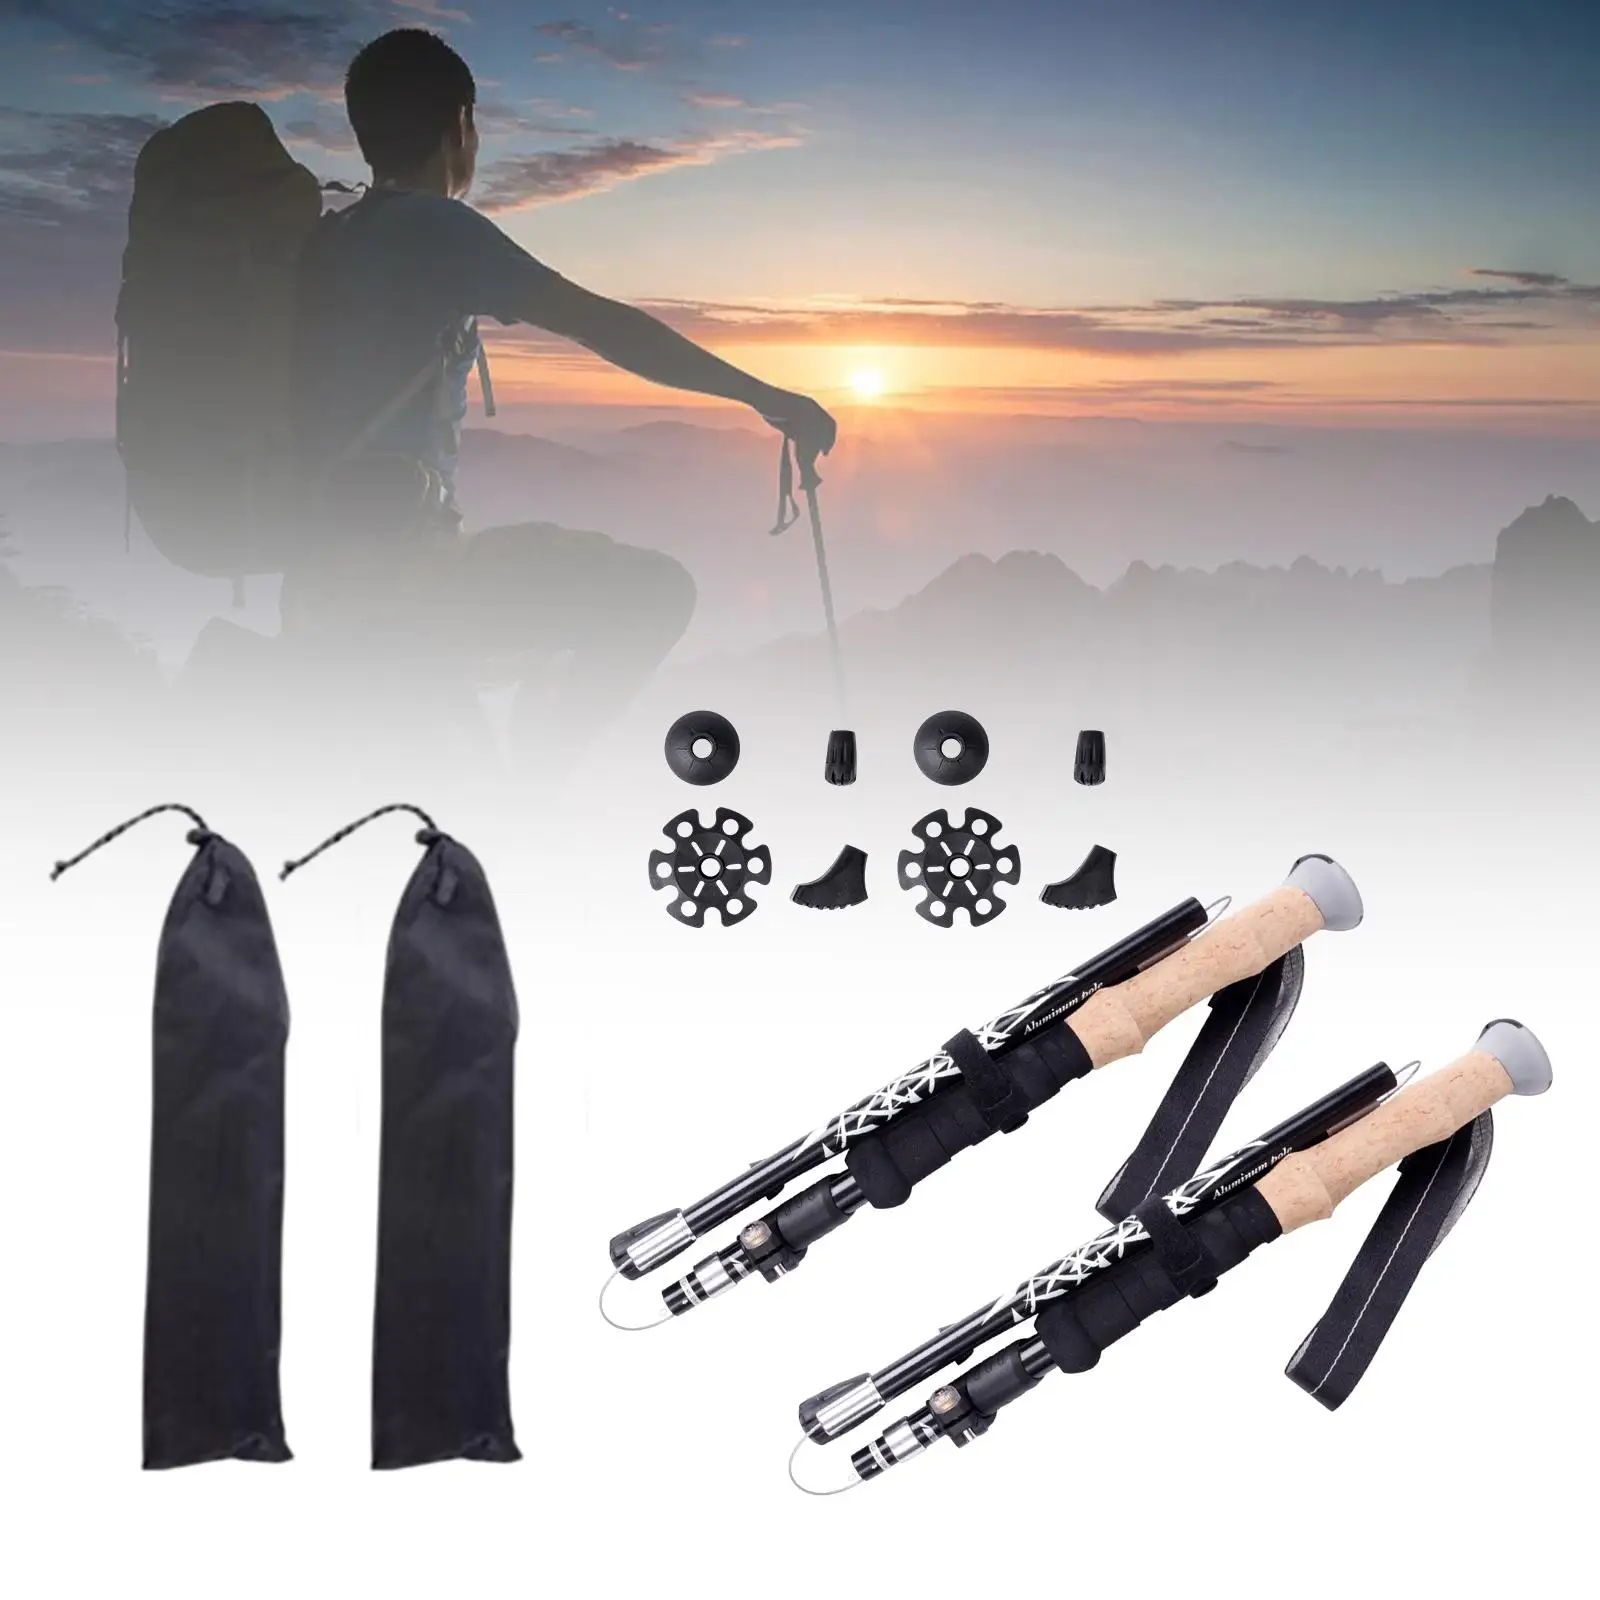 Folding Cane Collapsible Stick Telescopic Crutch Trekking Poles for Camping